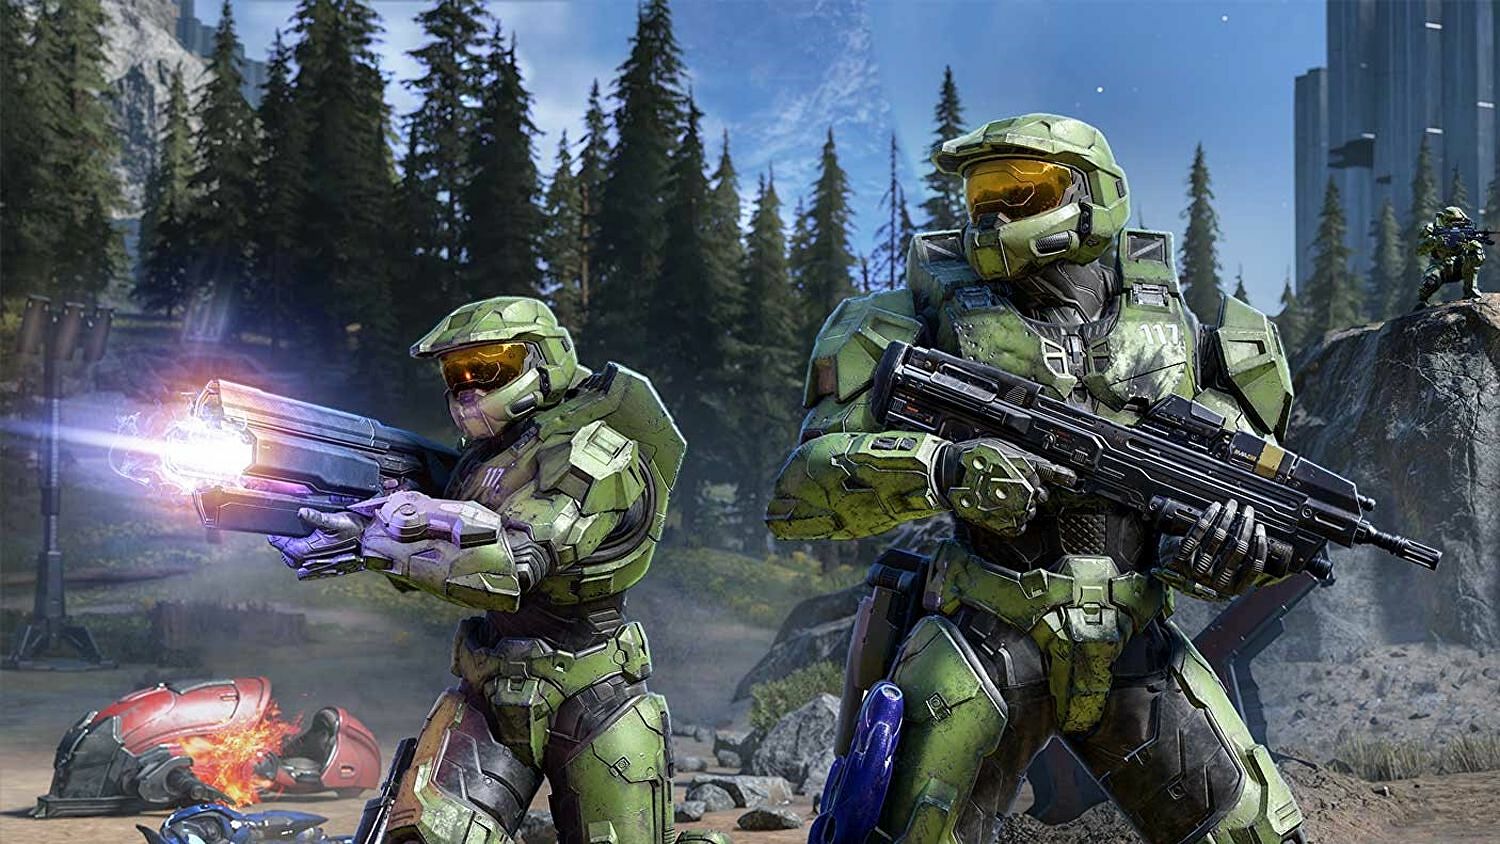 Halo Infinite lets each player pursue their own progression in co-op